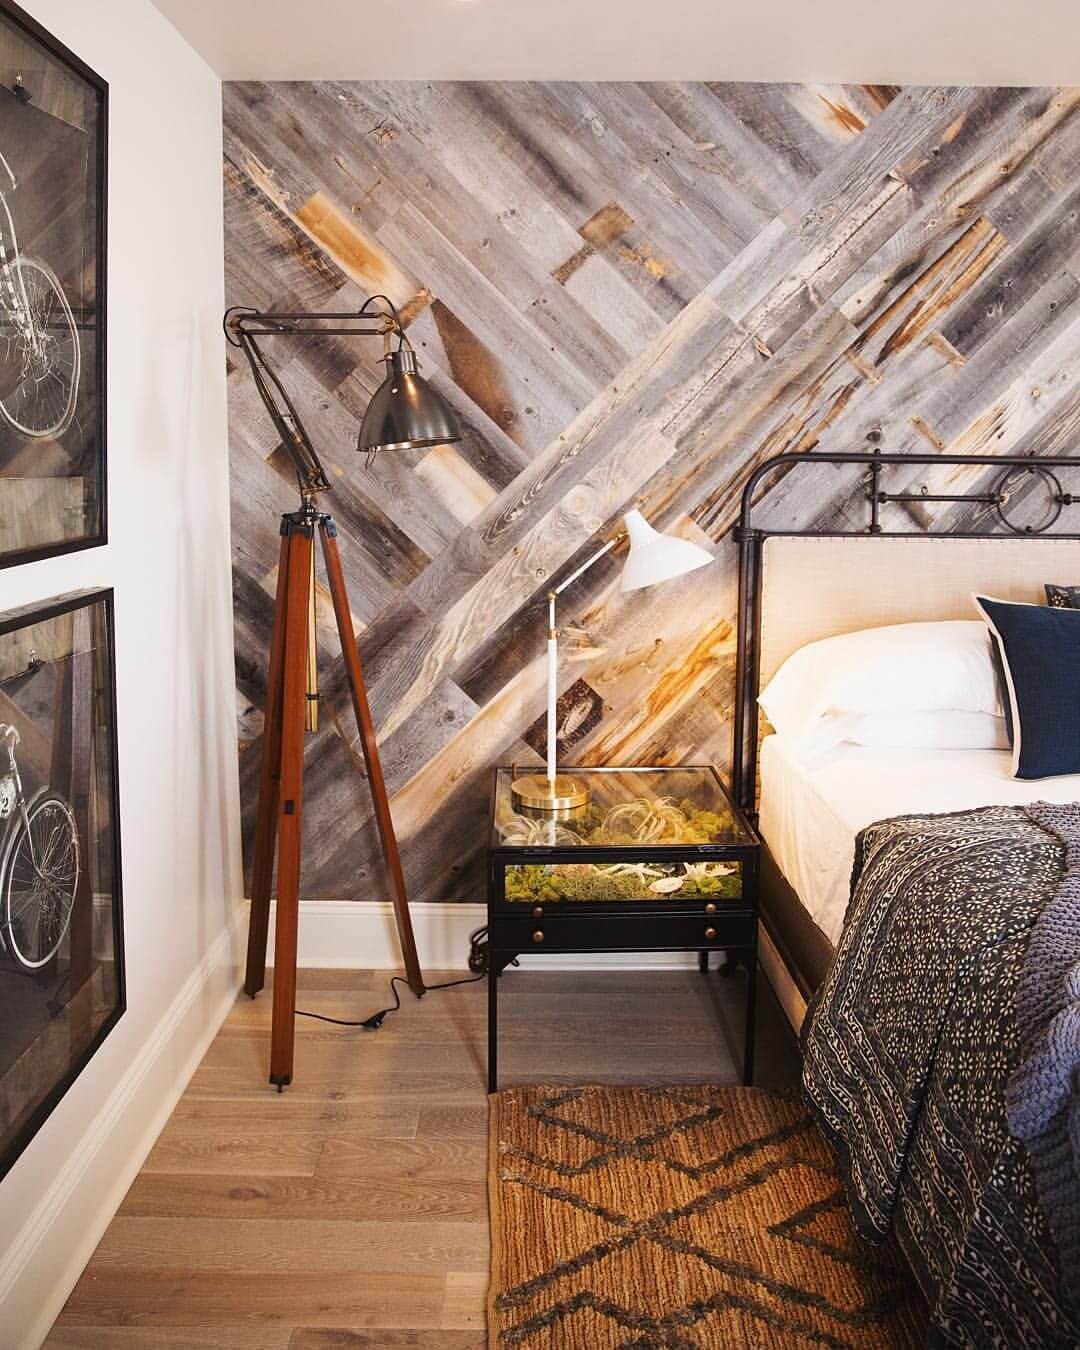 Brick Accent Wall Ideas - Get the Charm of Whitewash Woods - Harptimes.com